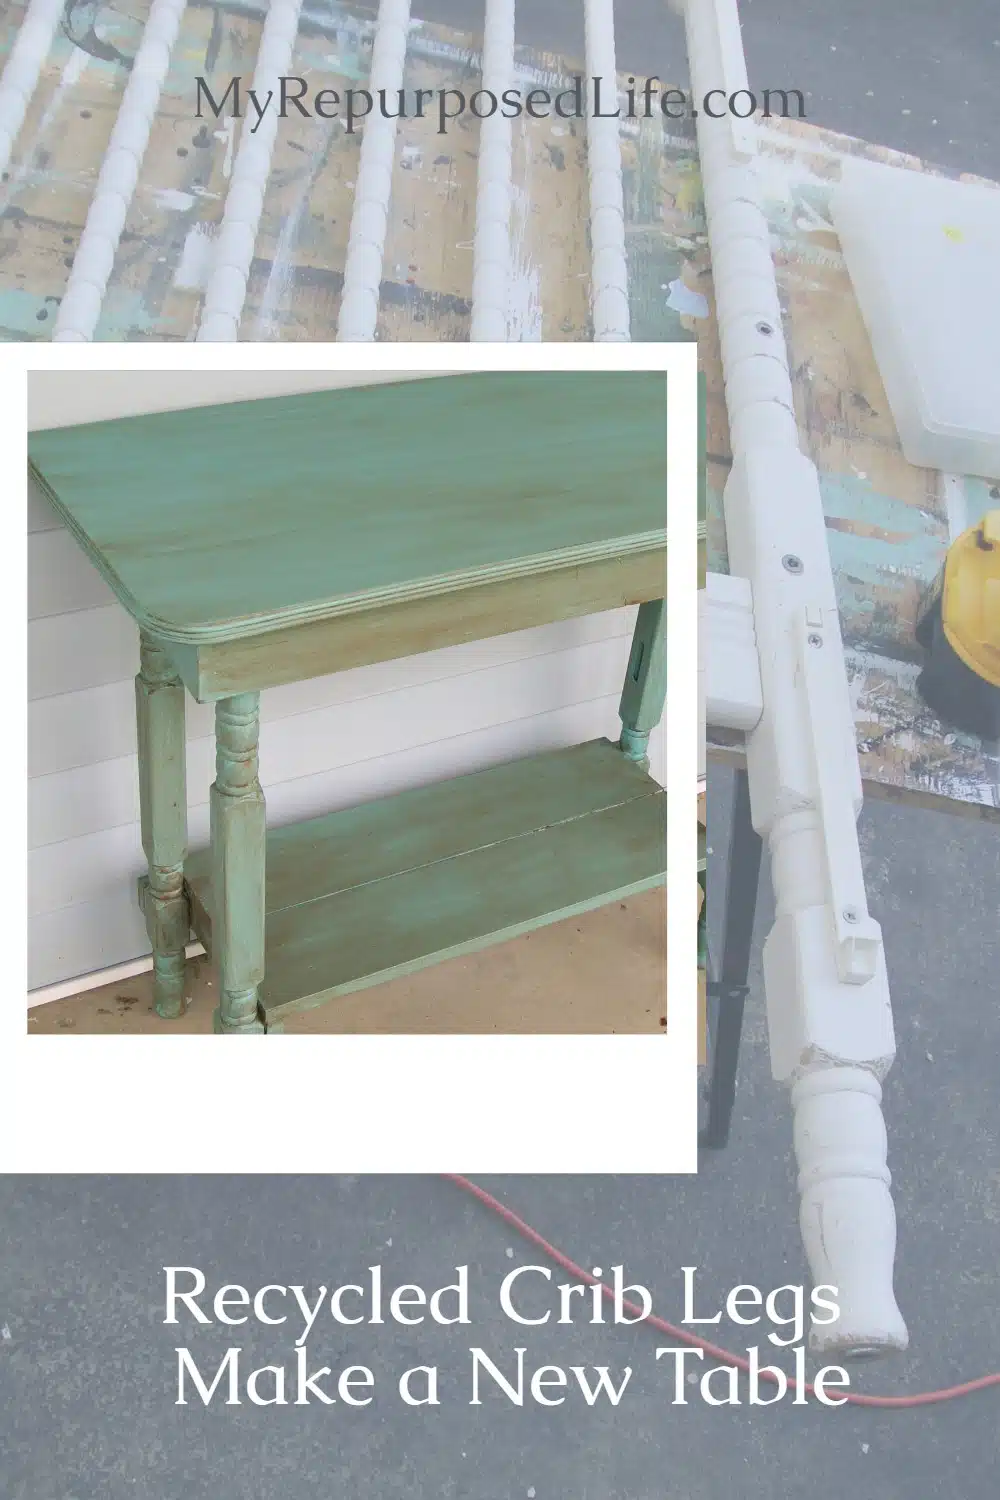 How to make a table using repurposed crib legs and hardware. Parting out old cribs is a great way to harvest materials for your next project. Never throw away the spindles or "L" brackets. This is an easy build using basic tools. #MyRepurposedLife #repurposed #furniture #crib #table #legs via @repurposedlife